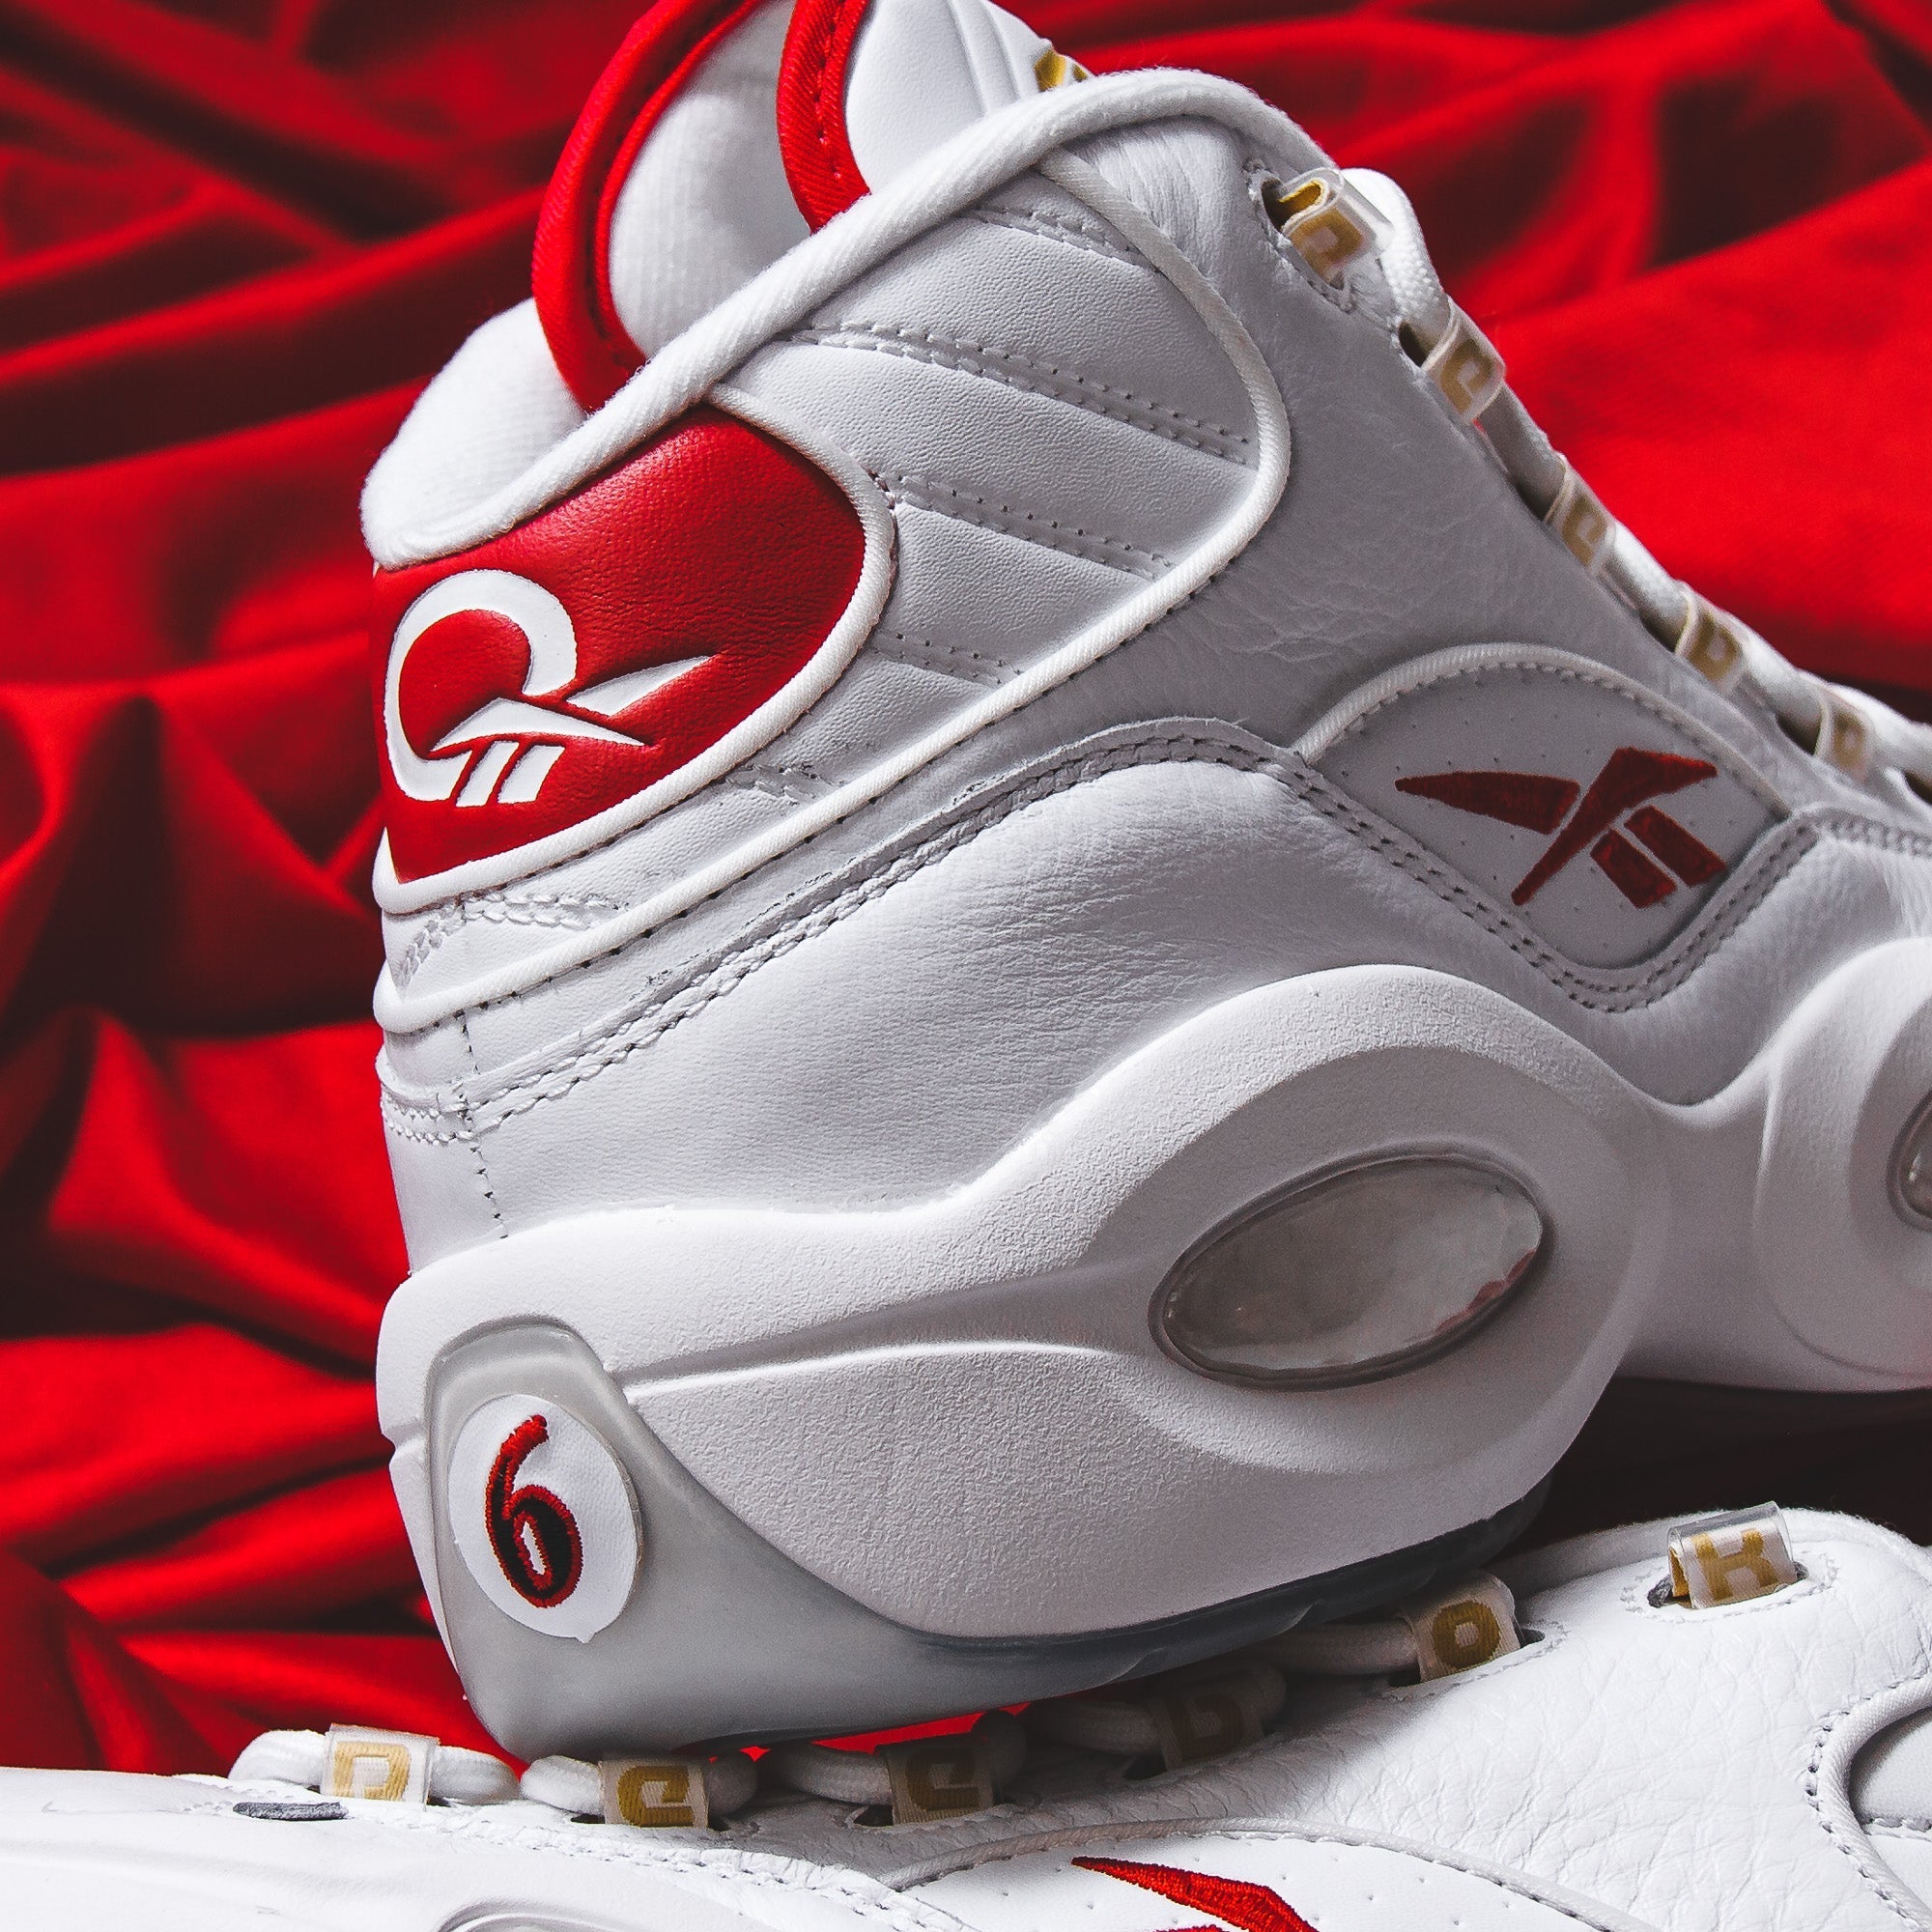 Reebok Only Made 42 Pairs of These Exclusive Allen Iverson Sneakers